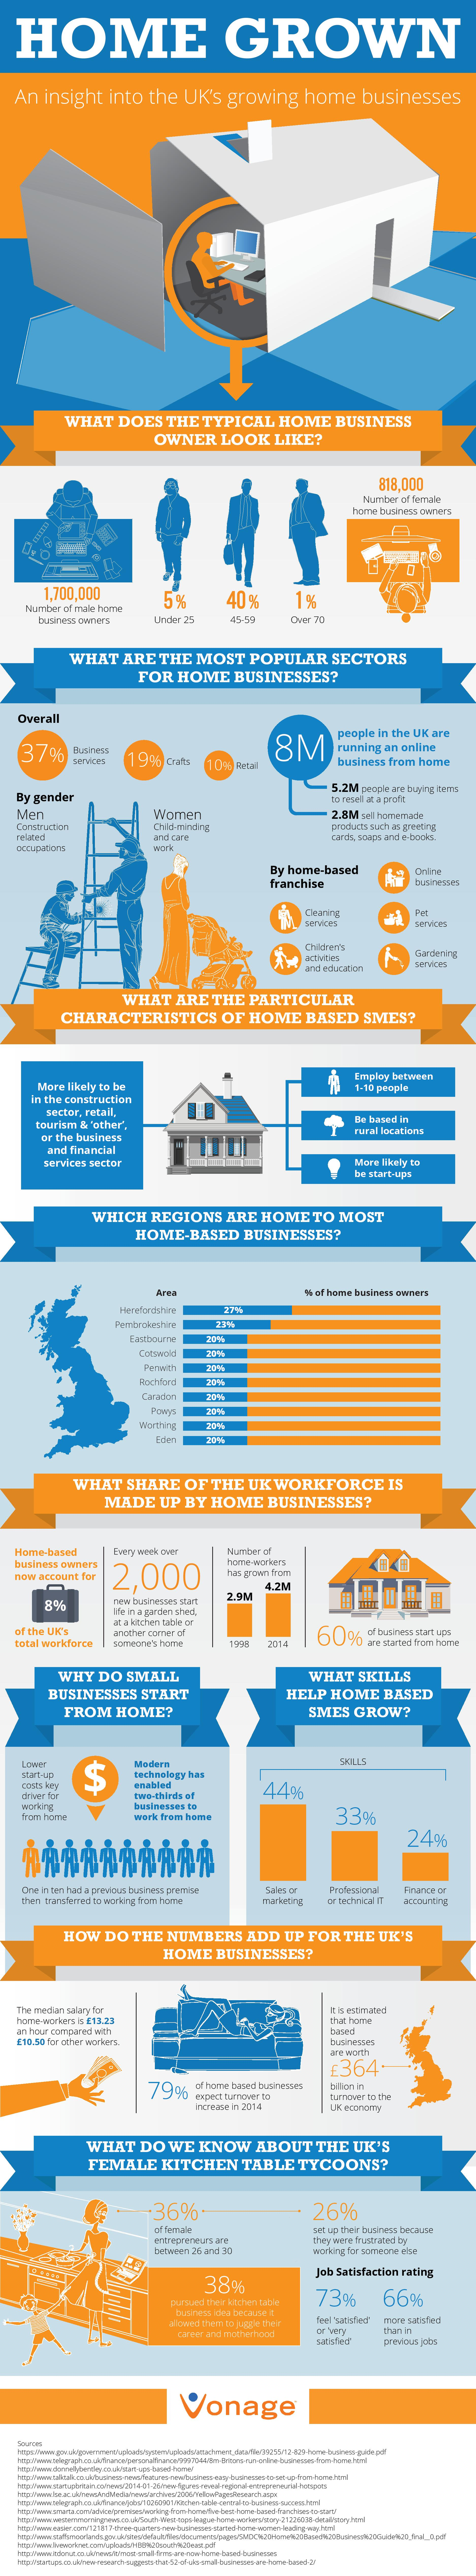 The Growth of Home Business in the UK